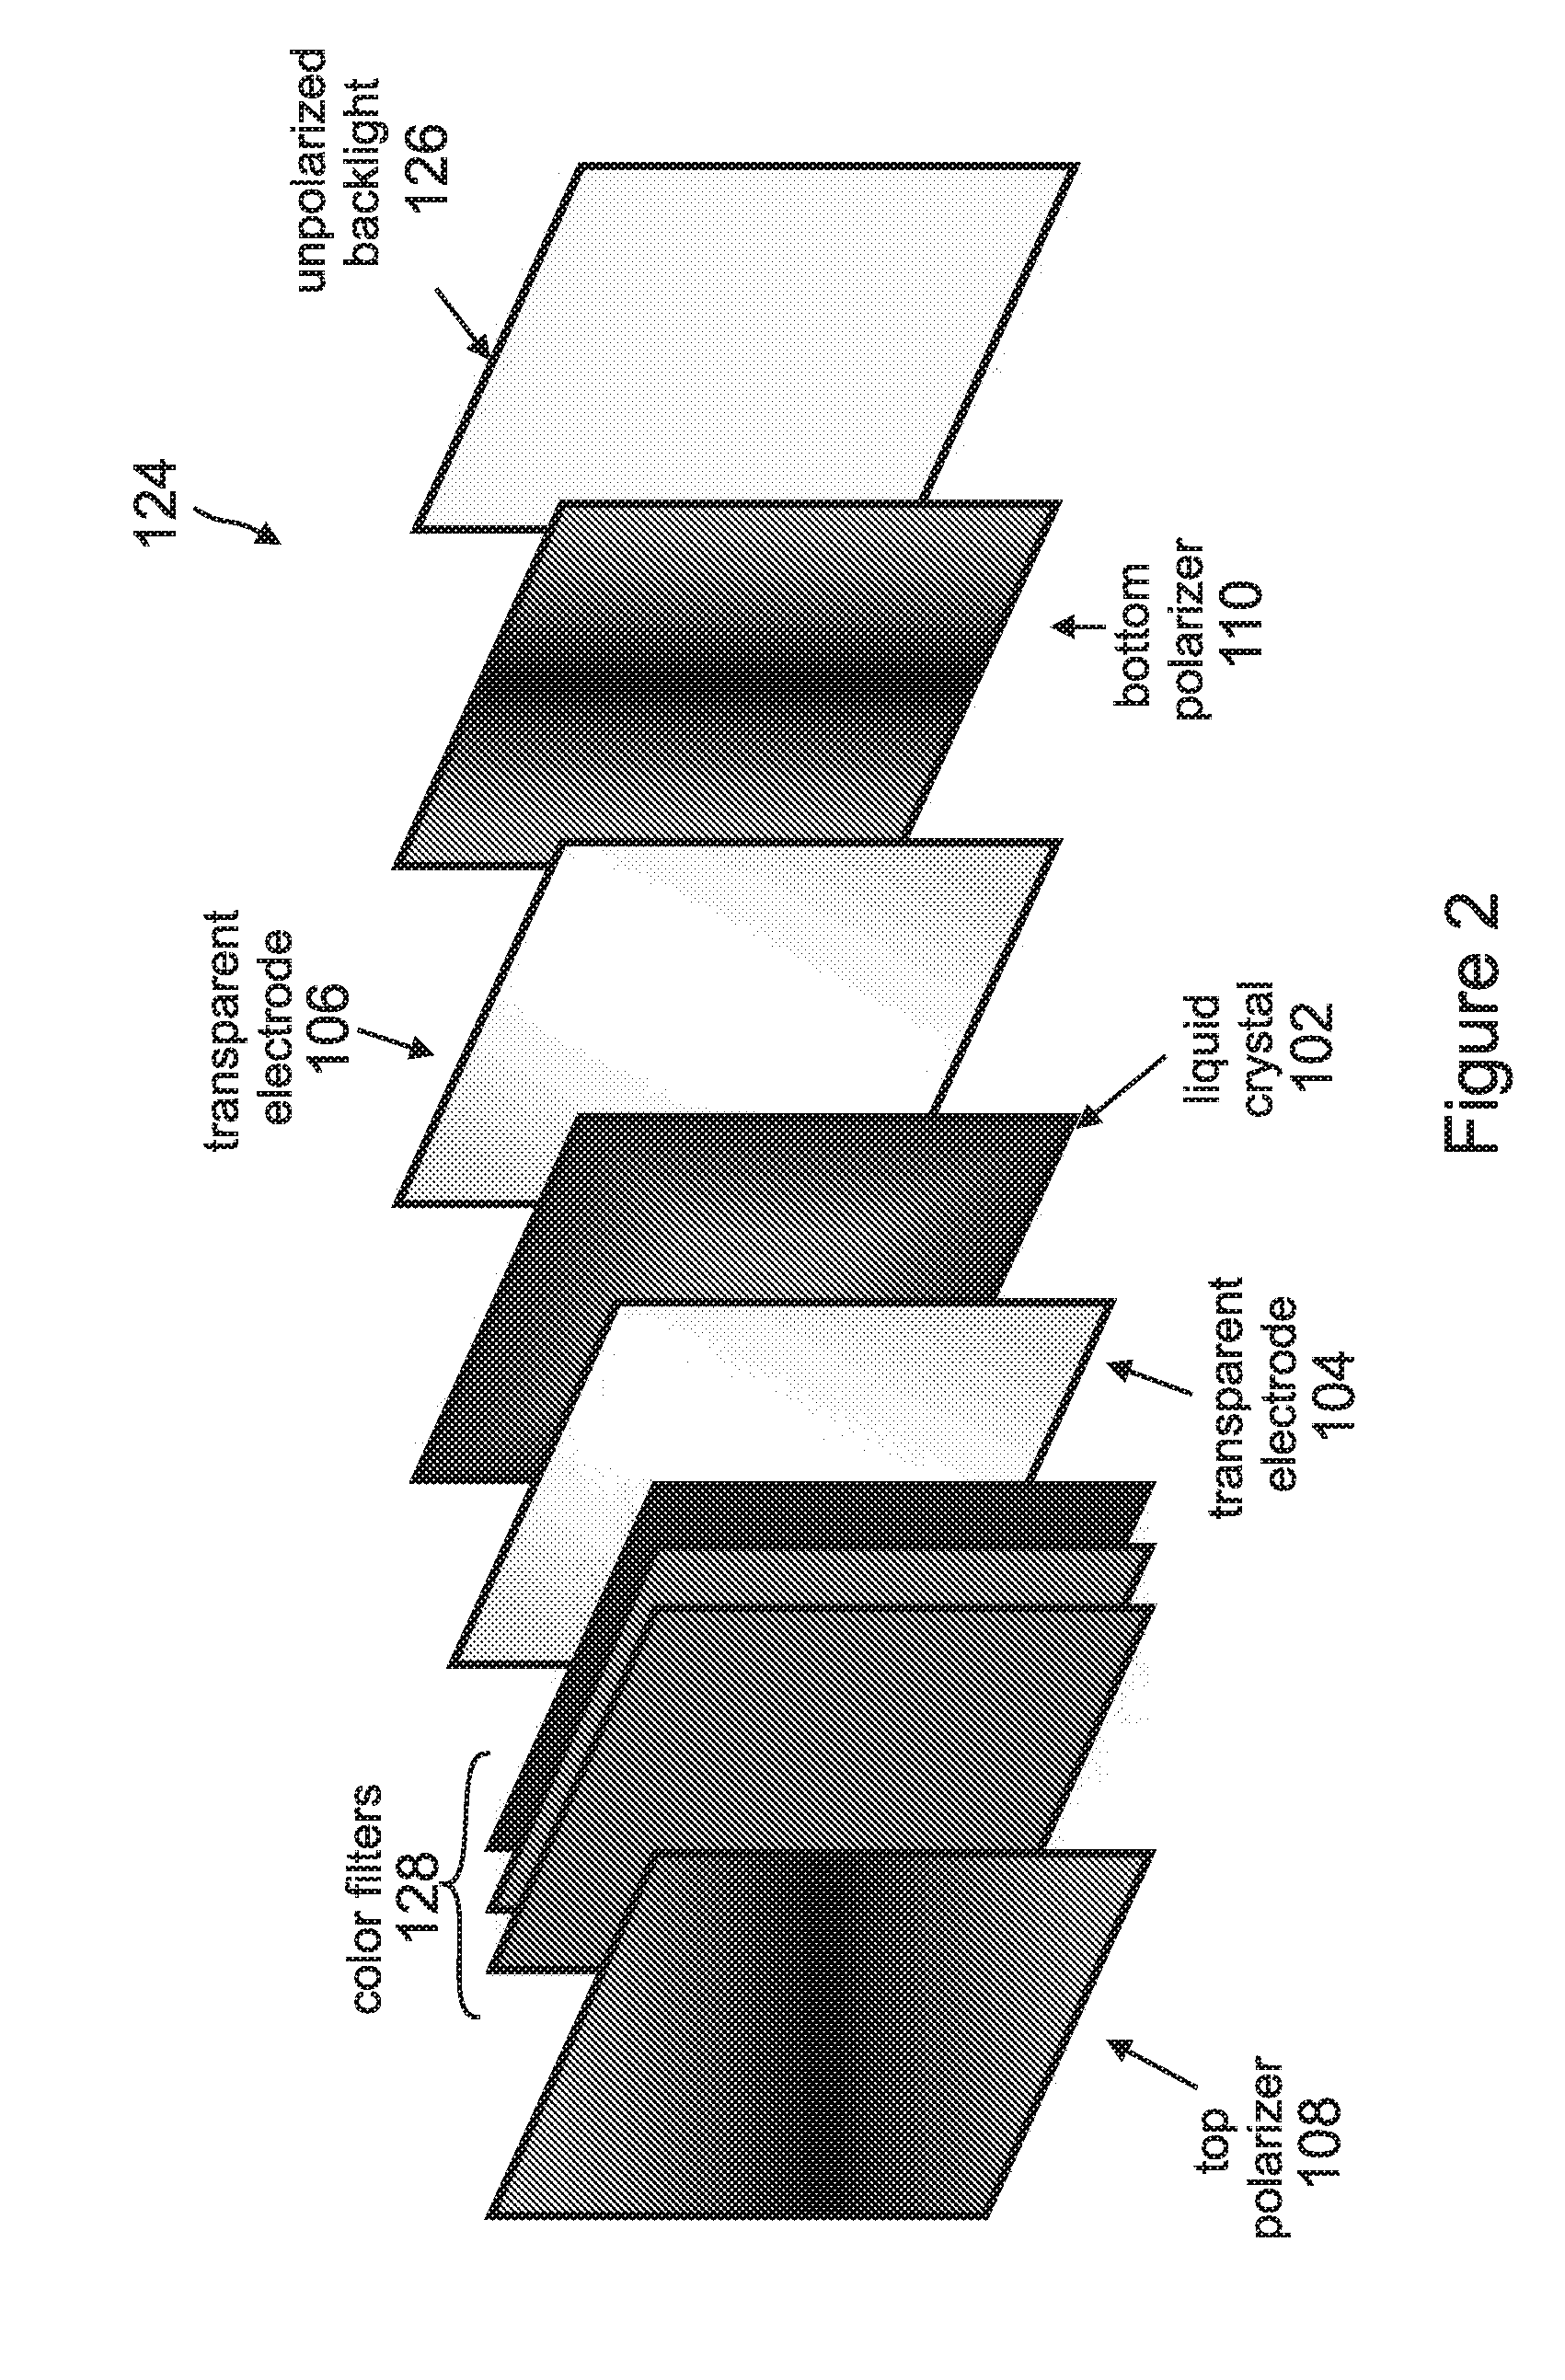 Linearly polarized backlight source in conjunction with polarized phosphor emission screens for use in liquid crystal displays